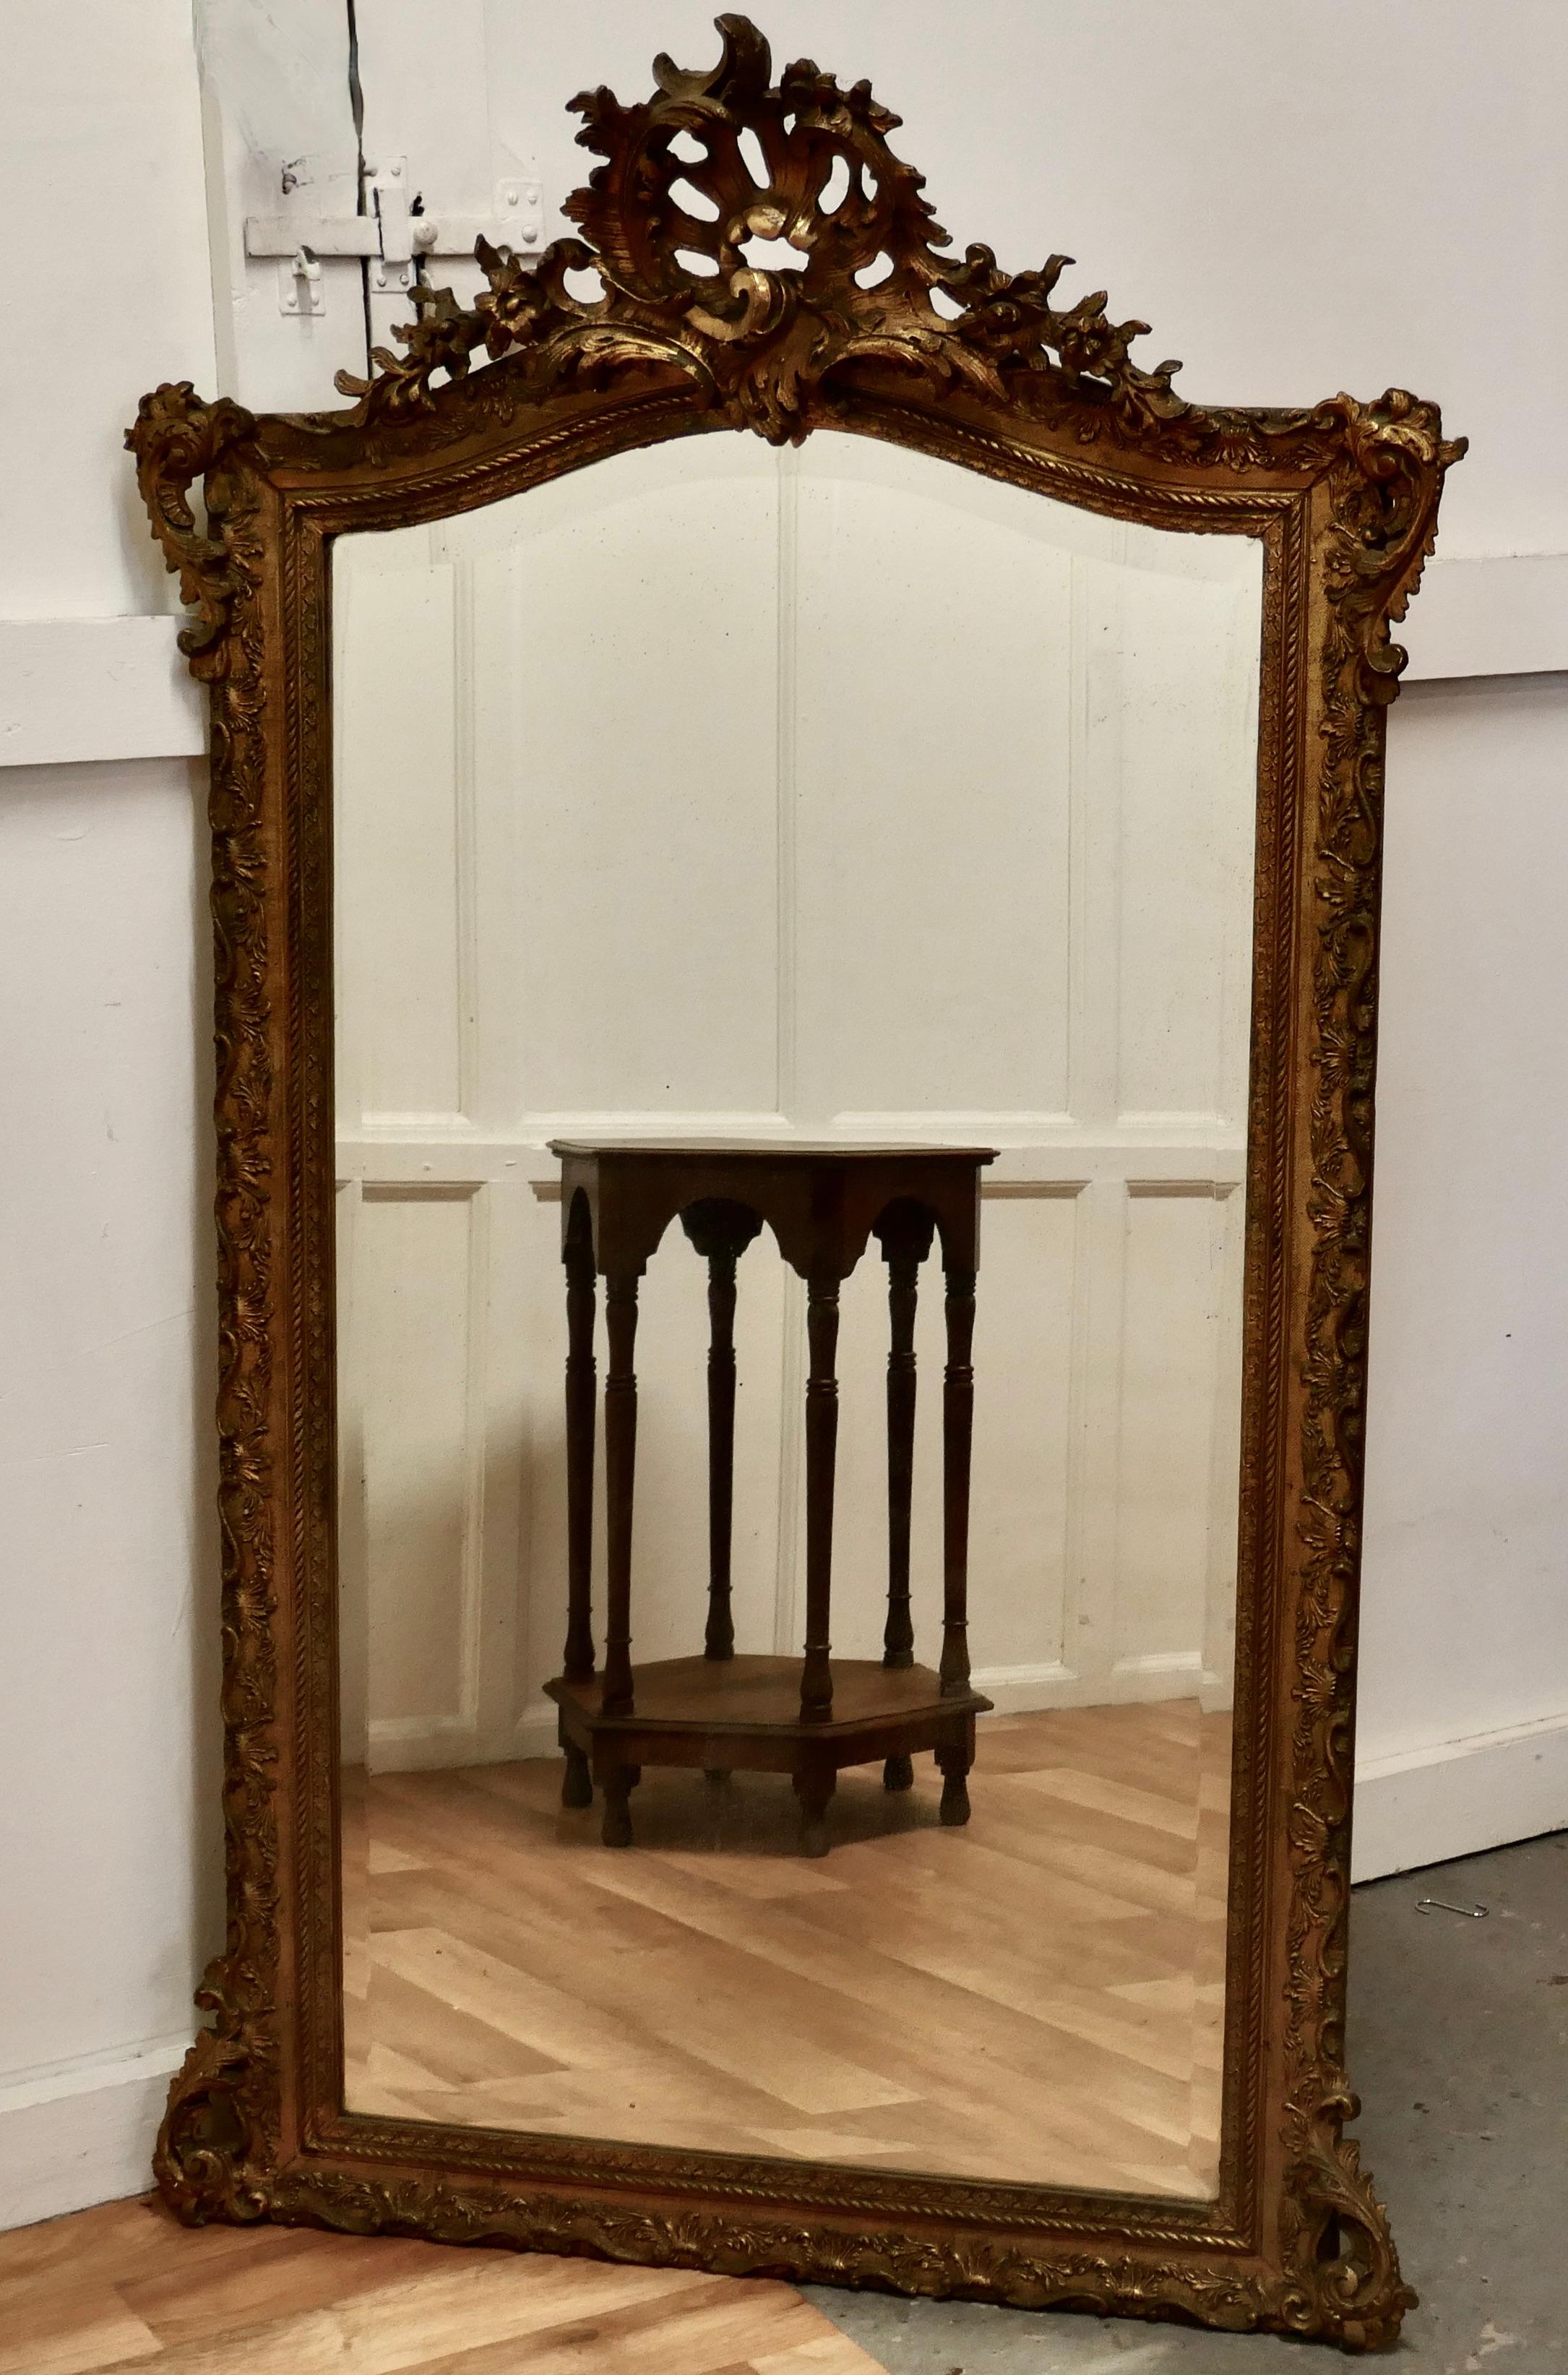 A large 19th century french gilt wall mirror.

This mirror has a beautiful gilt and gesso frame the carved frame has darkened slightly with age and has rich bright gold leaf showing through
The 4” wide moulded frame is decorated and has an